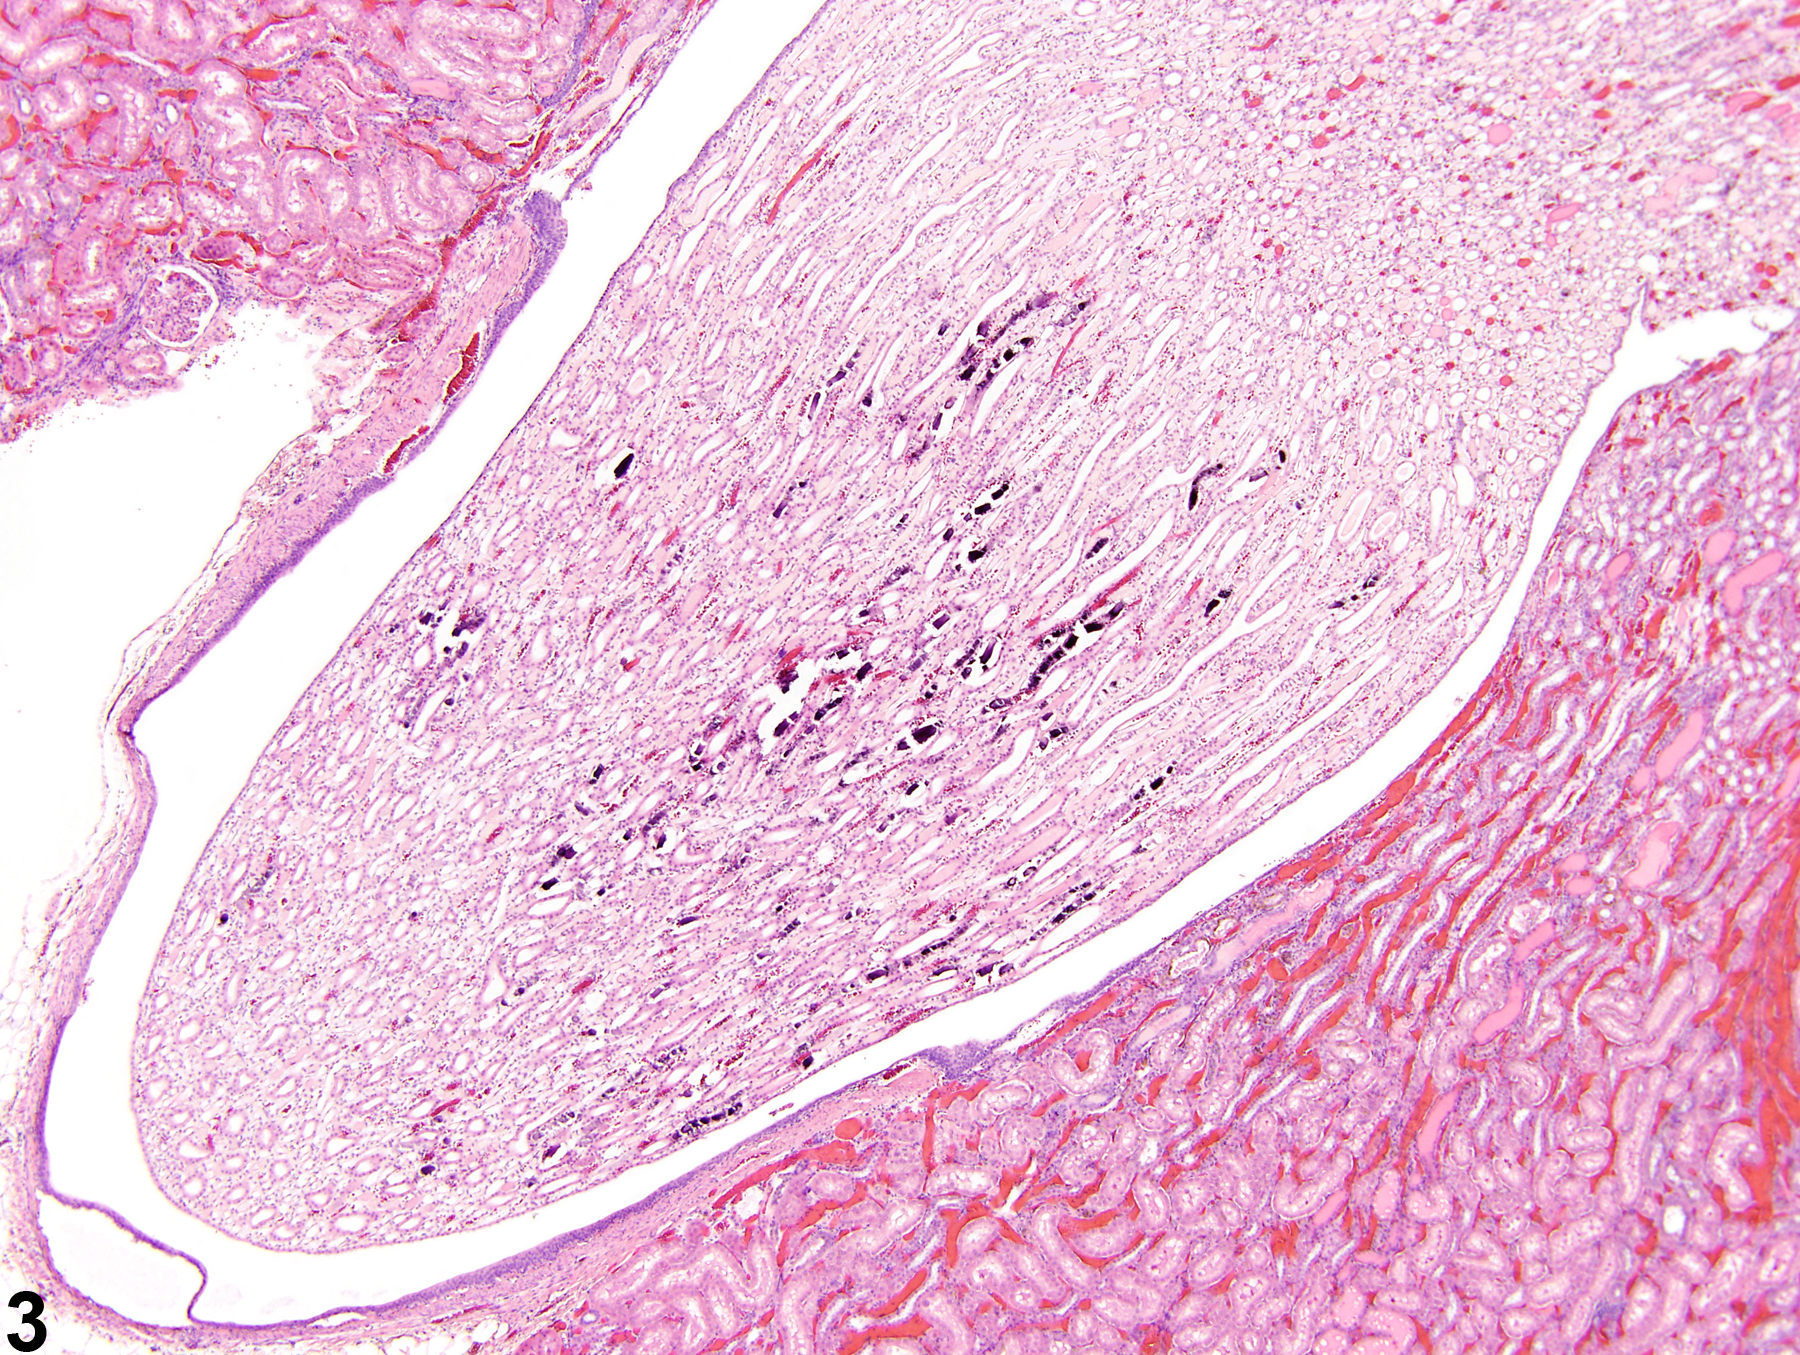 Image of mineralization in the kidney from a male F344/N rat in a chronic study